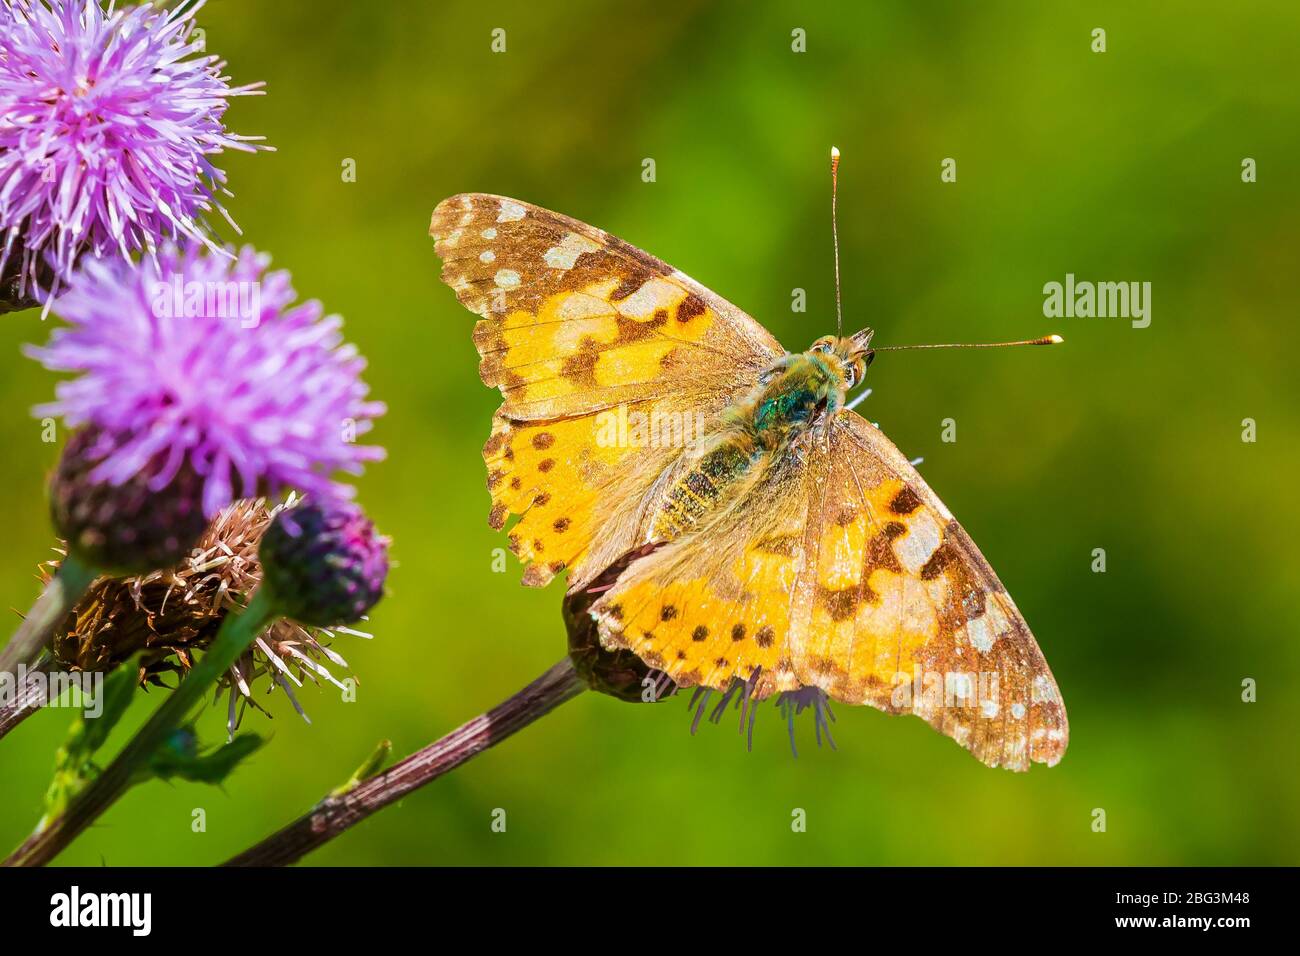 Painted Lady butterfly vanessa cardu feeding nectar from a purple thistle flower. Stock Photo